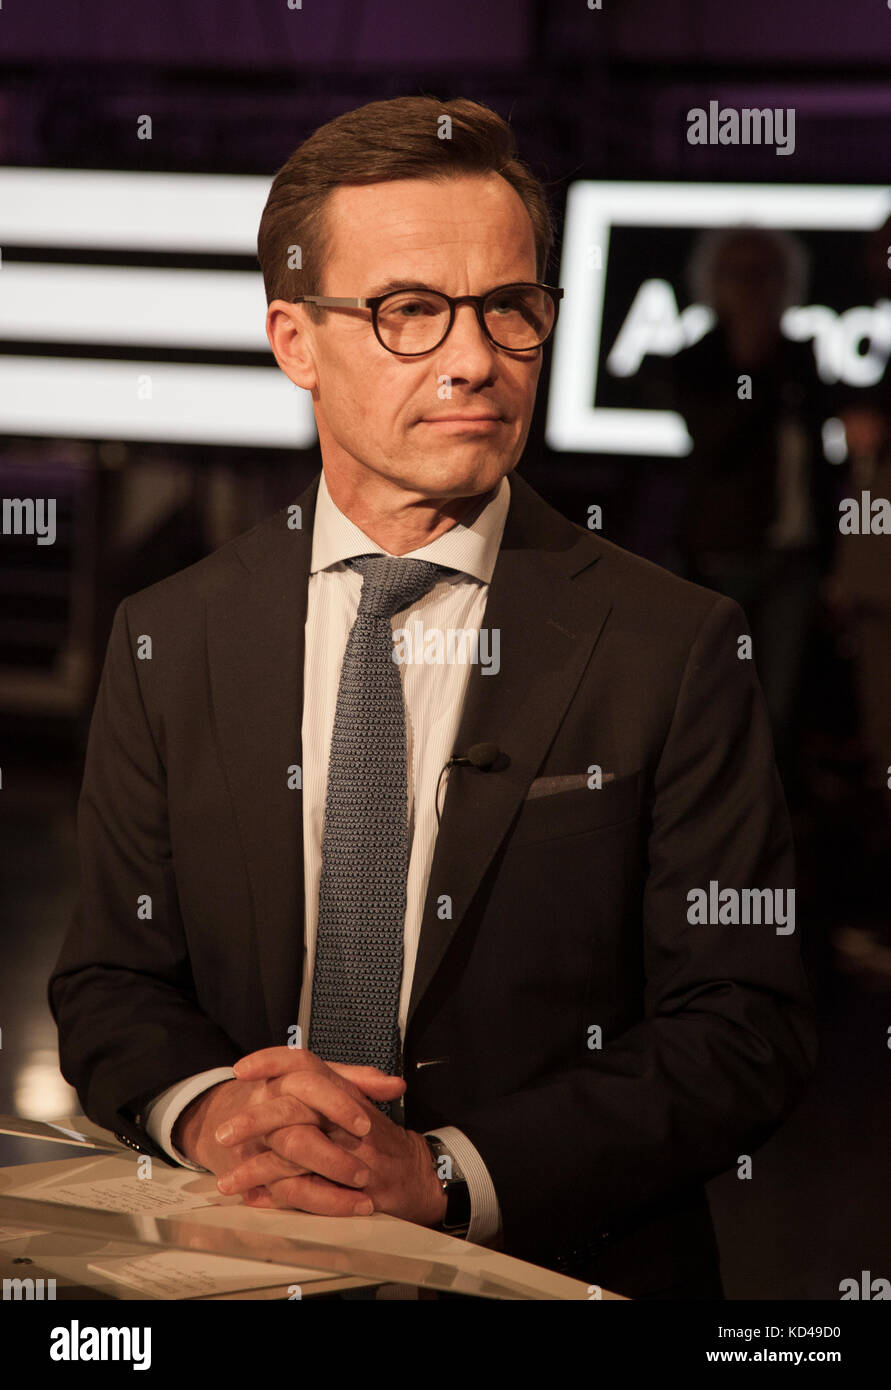 The Swedish election year 2018 began with a party leadership debate in Swedish television,The new elected Moderaternas Party leader Ulf Kristersson ma Stock Photo